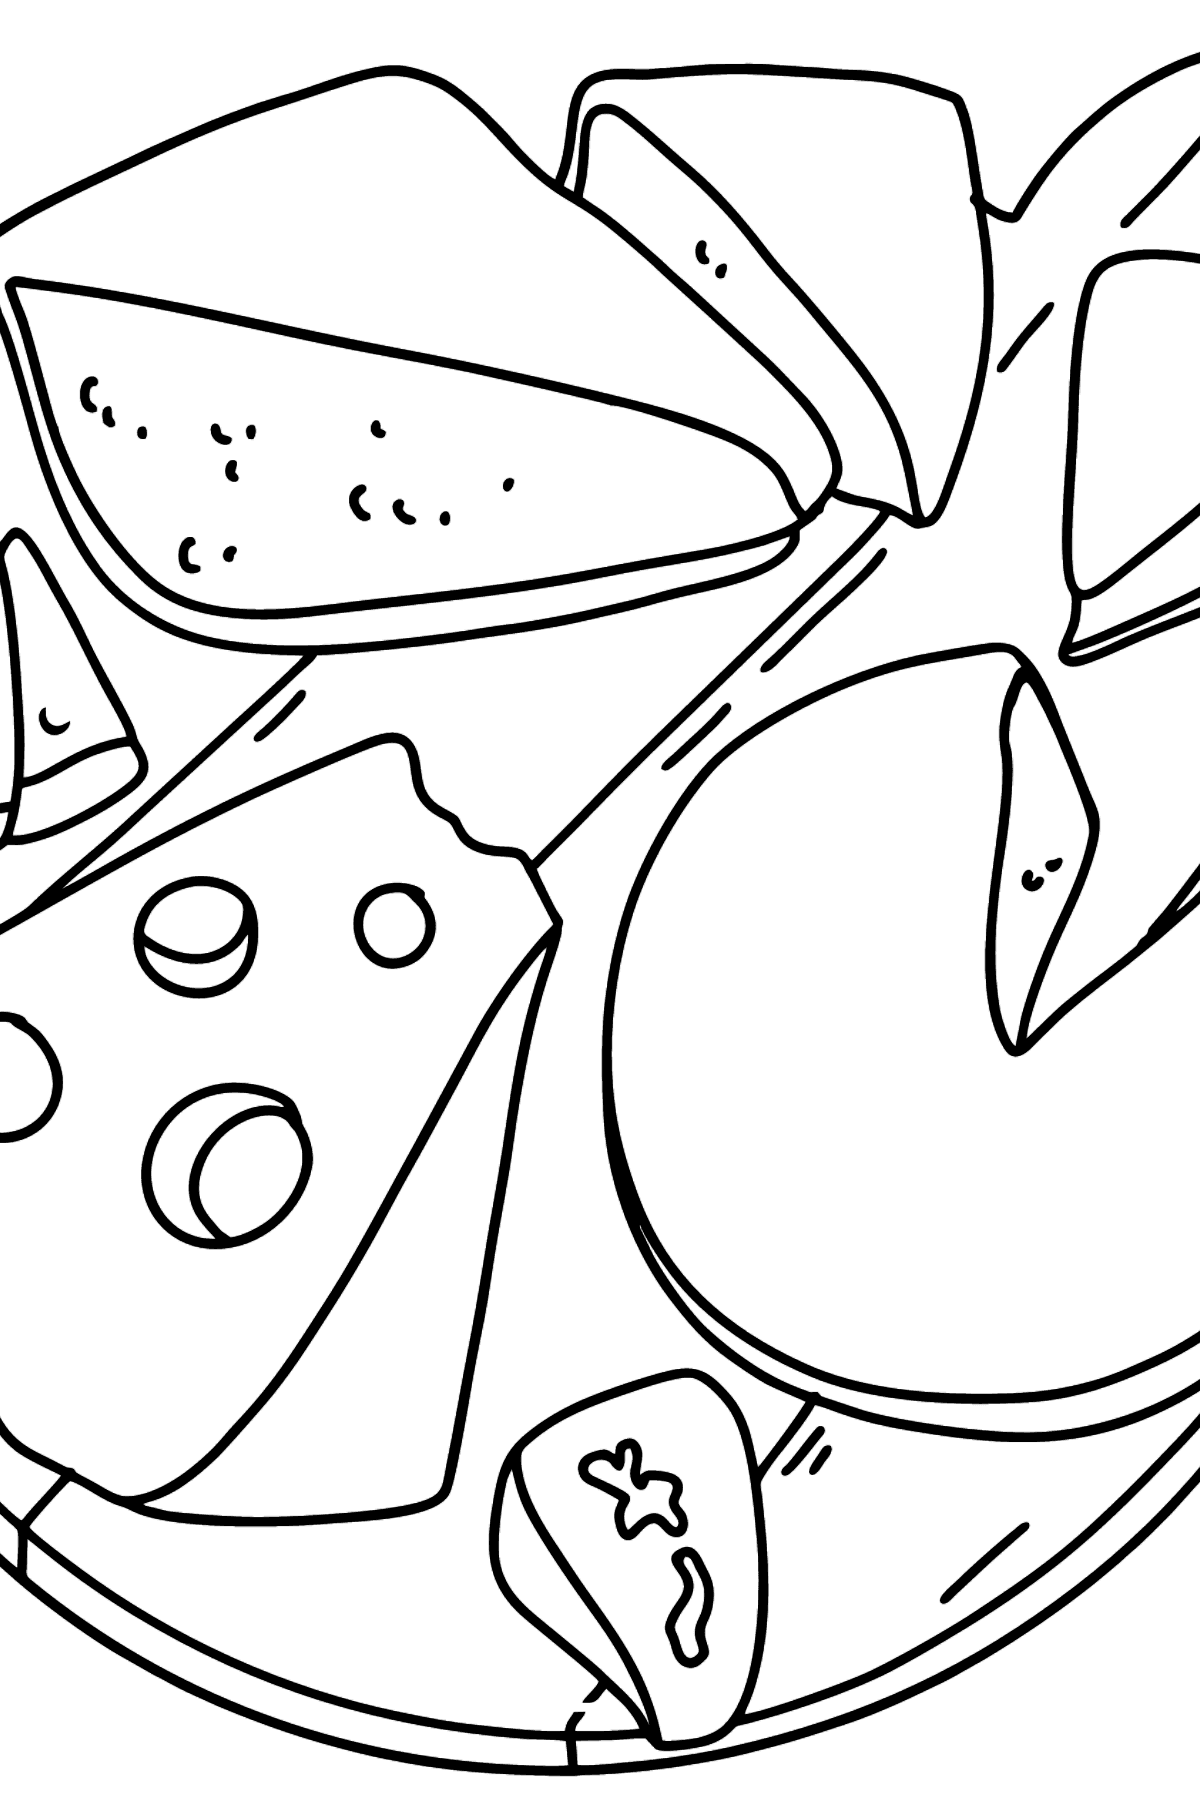 Cheese Plate coloring page - Coloring Pages for Kids